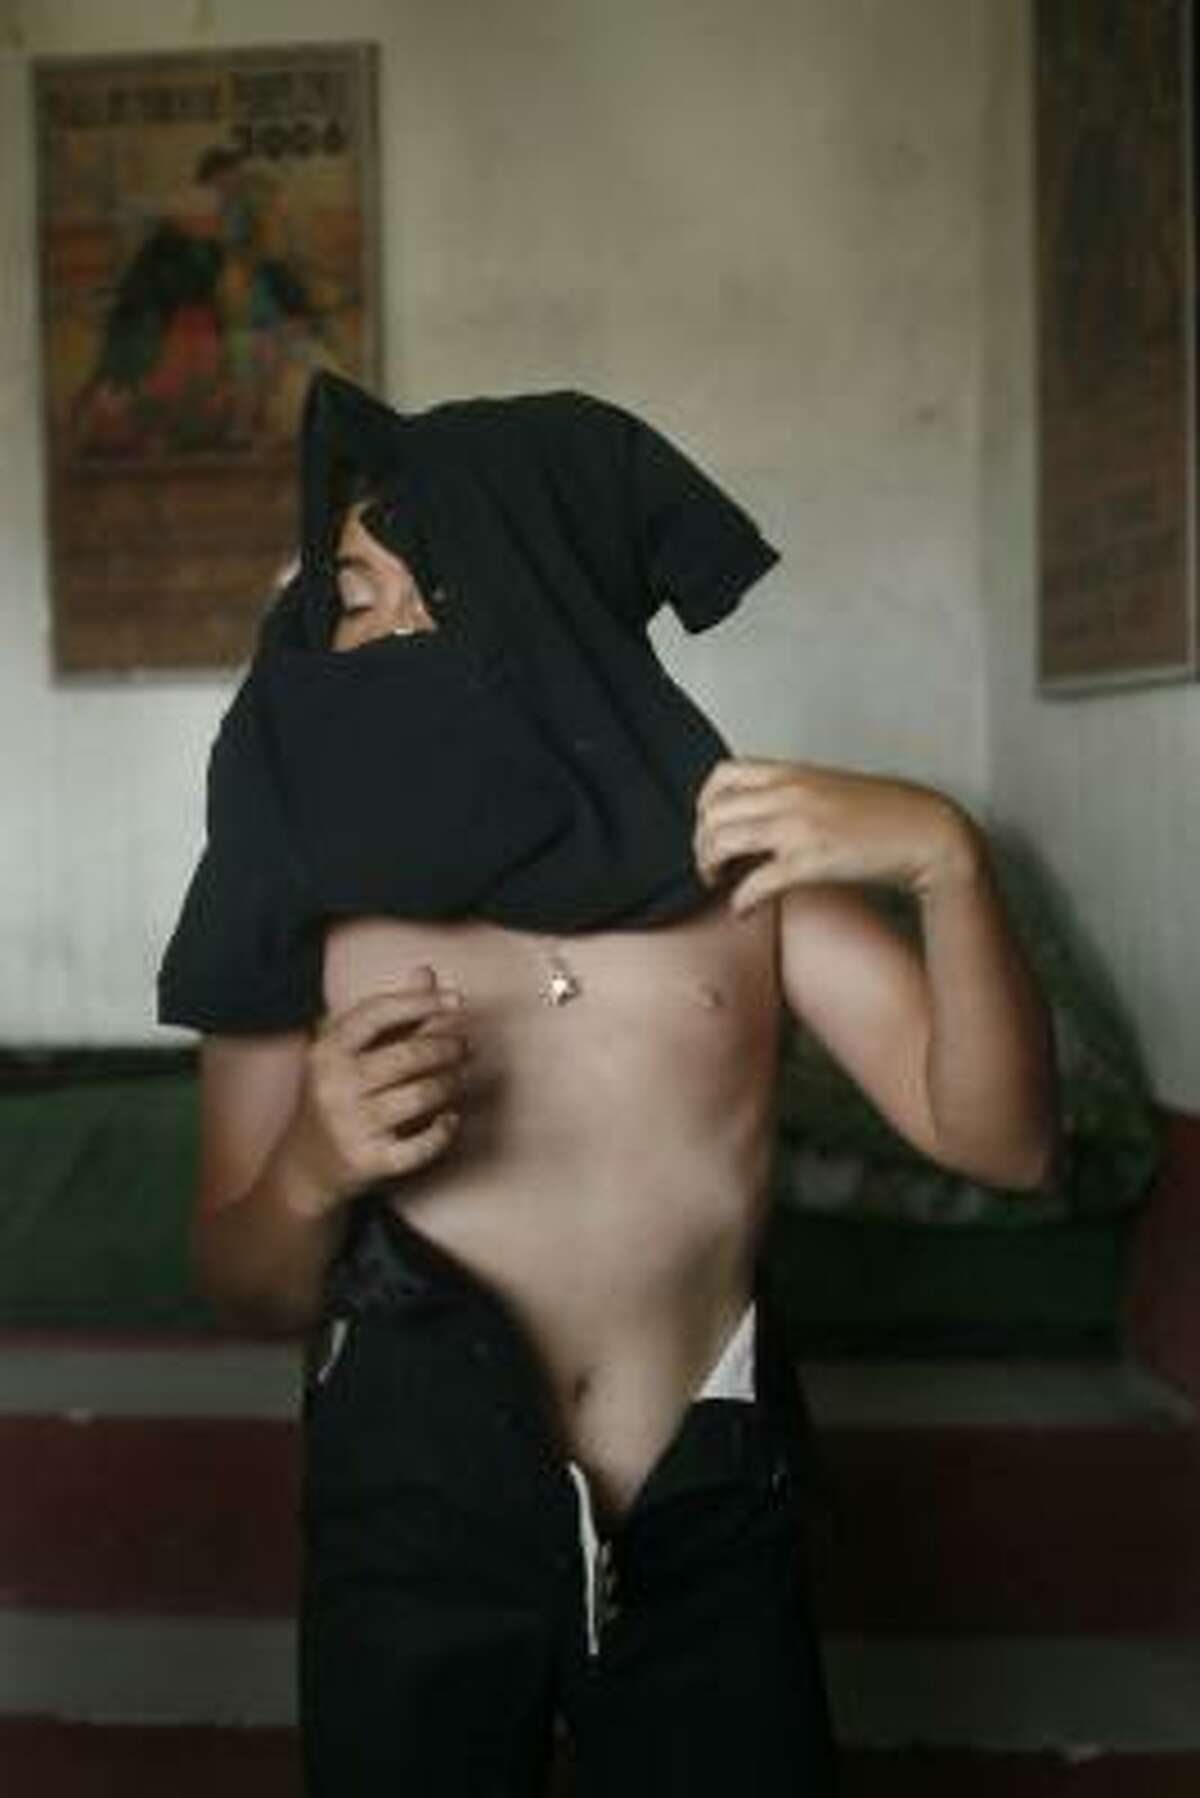 Franco-Mexican bullfighter Michel Lagravere, 12, known as Michelito, gets dressed before a bullfight practice session in Tlaxcala, Mexico, Saturday, June 5, 2010.